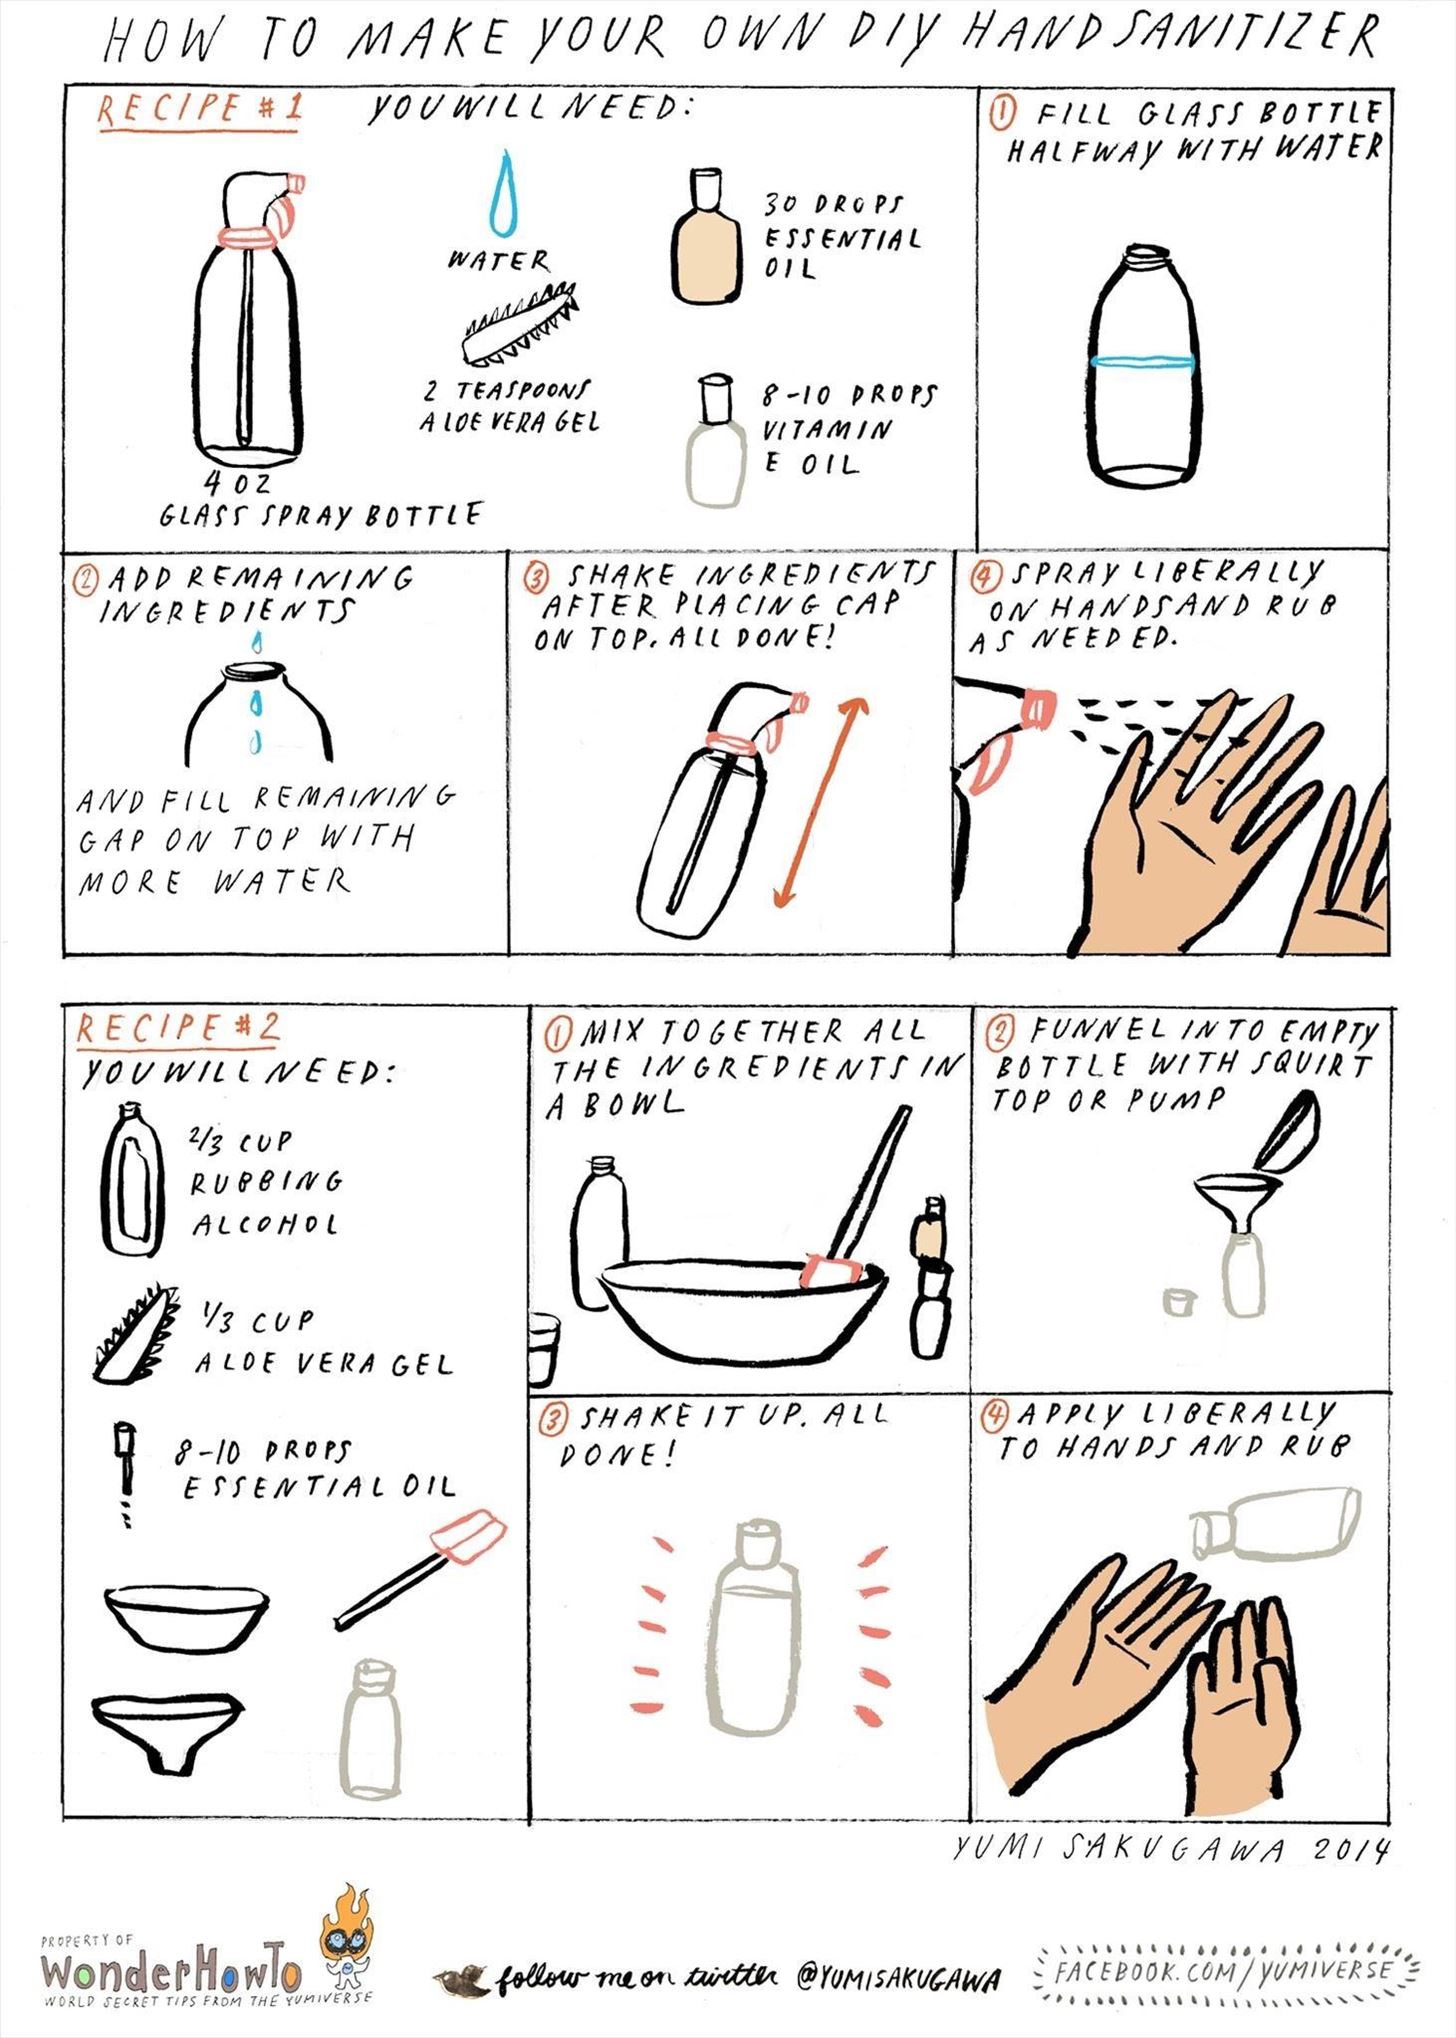 How to Make Your Own Personal Hand Sanitizer at Home for Cheap